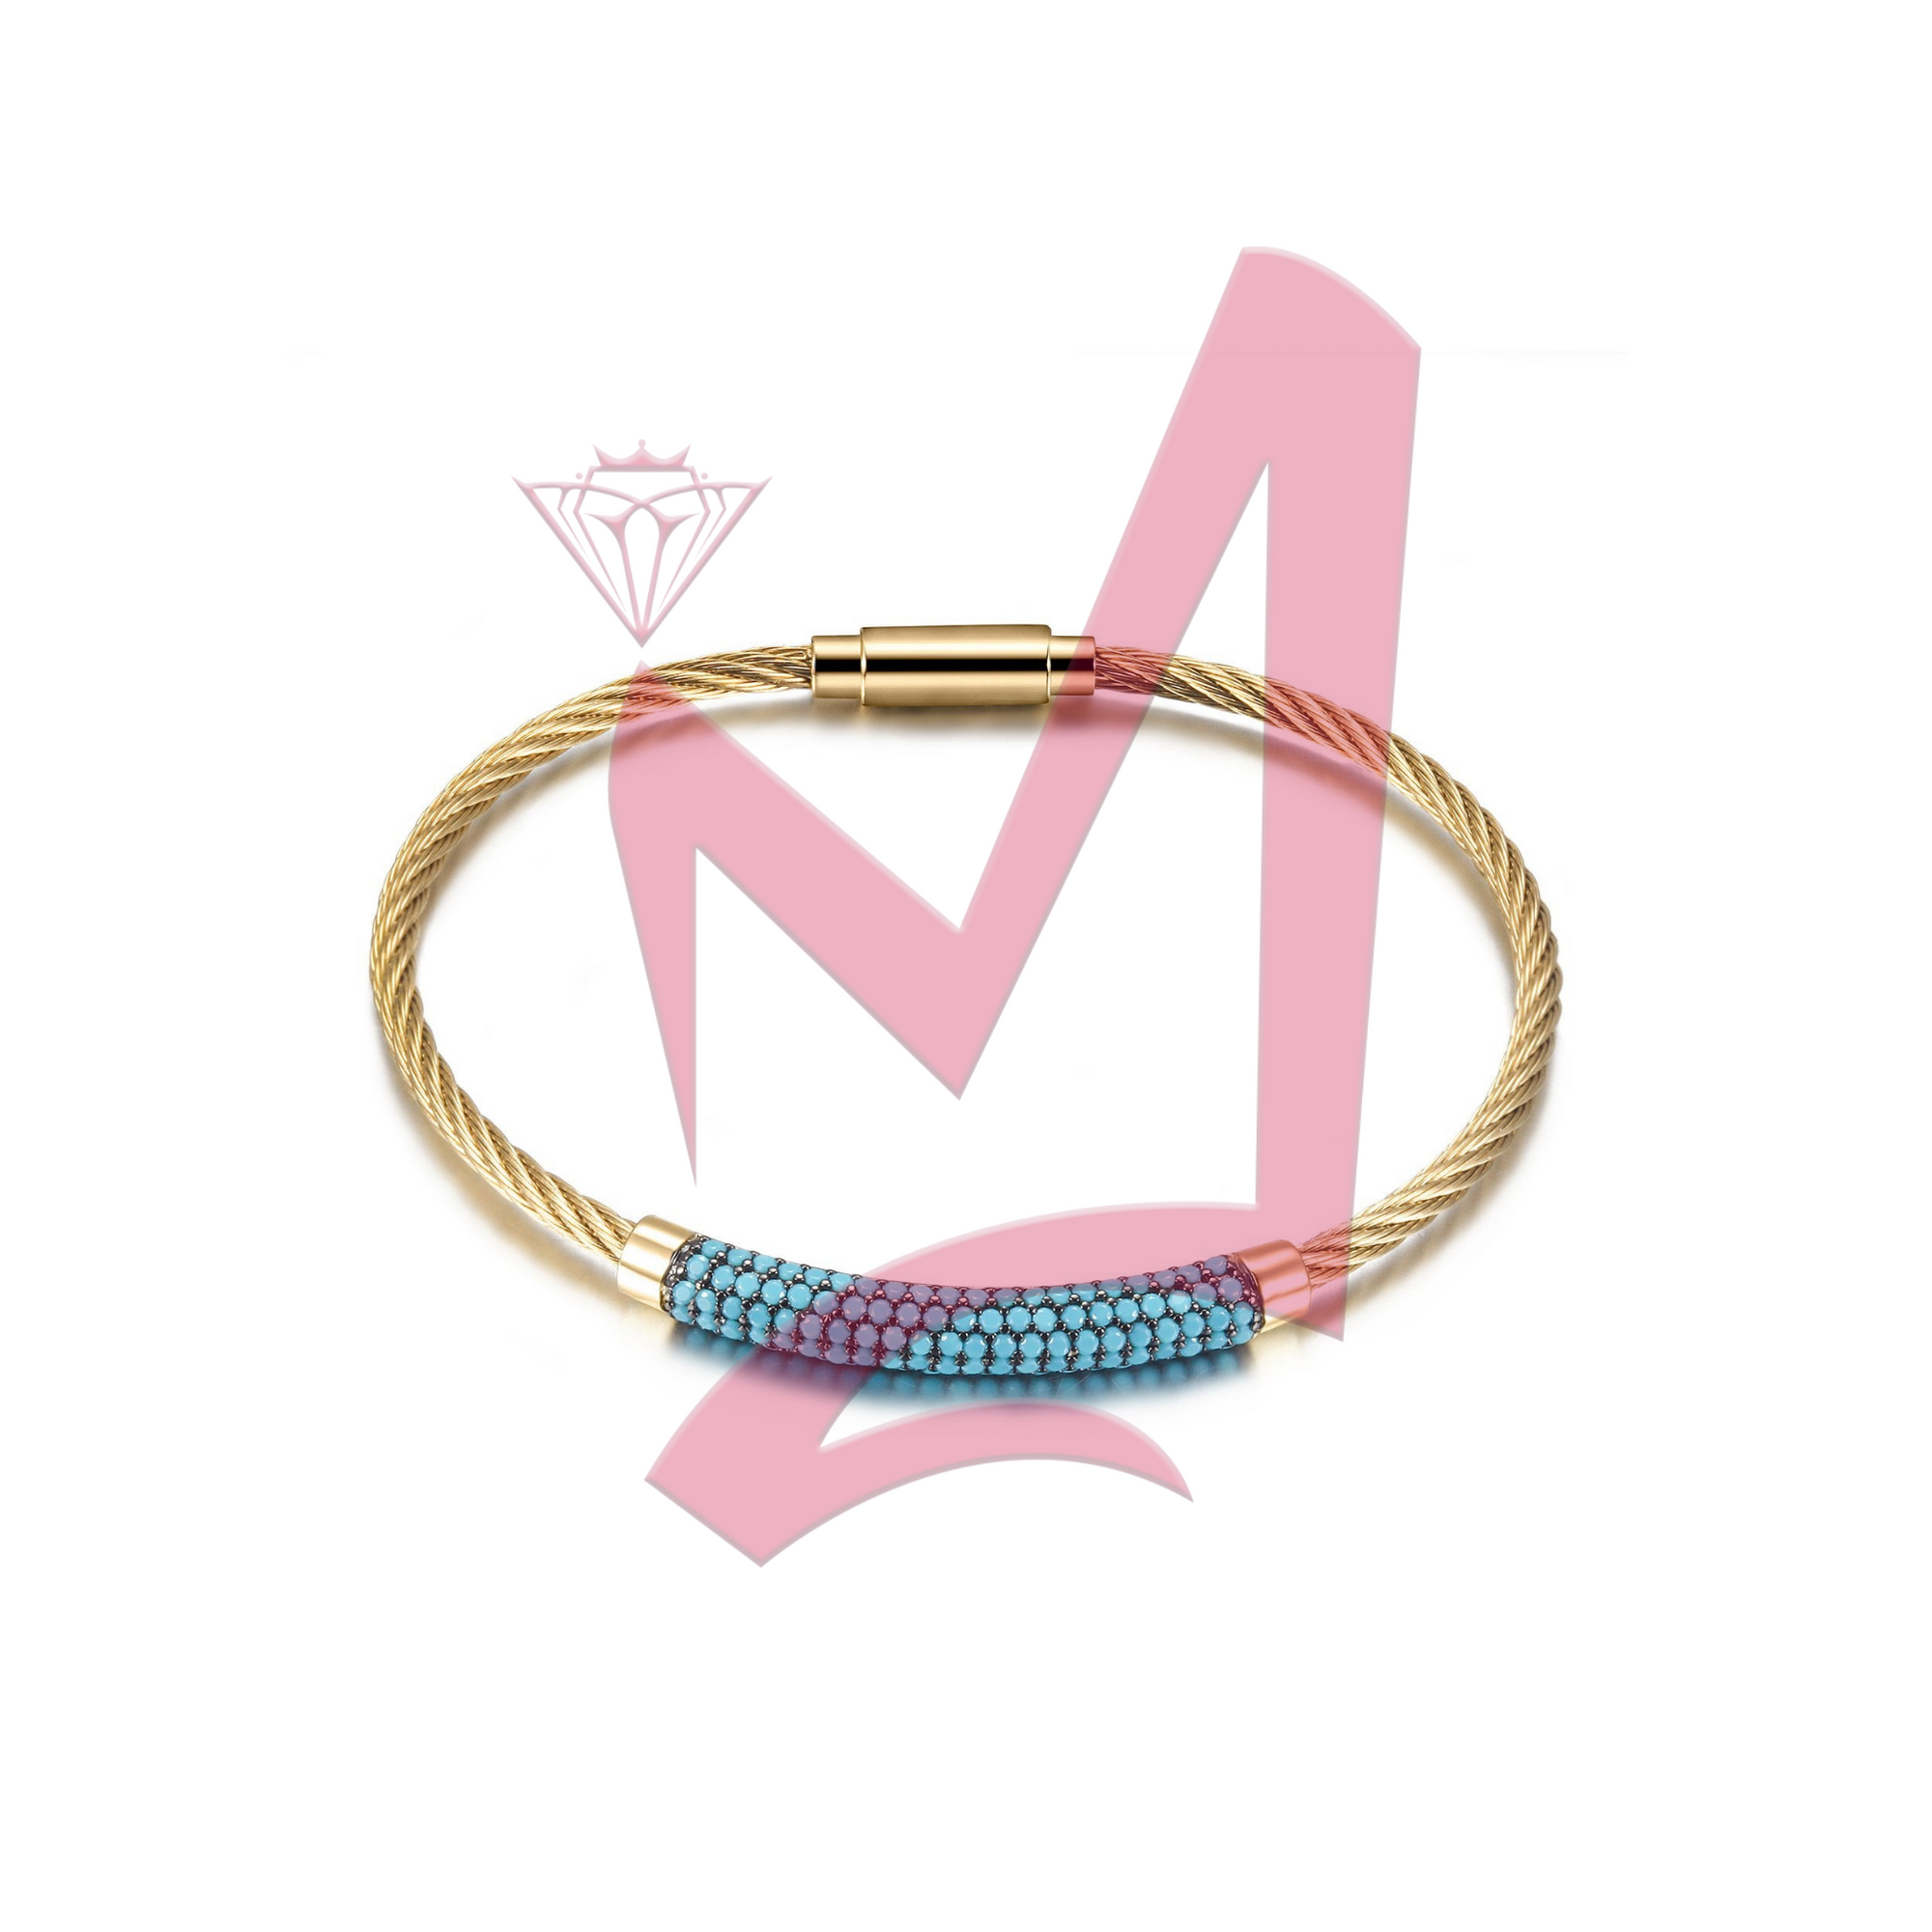 Gemstone Turquoise in 14K Plated Gold Bangle